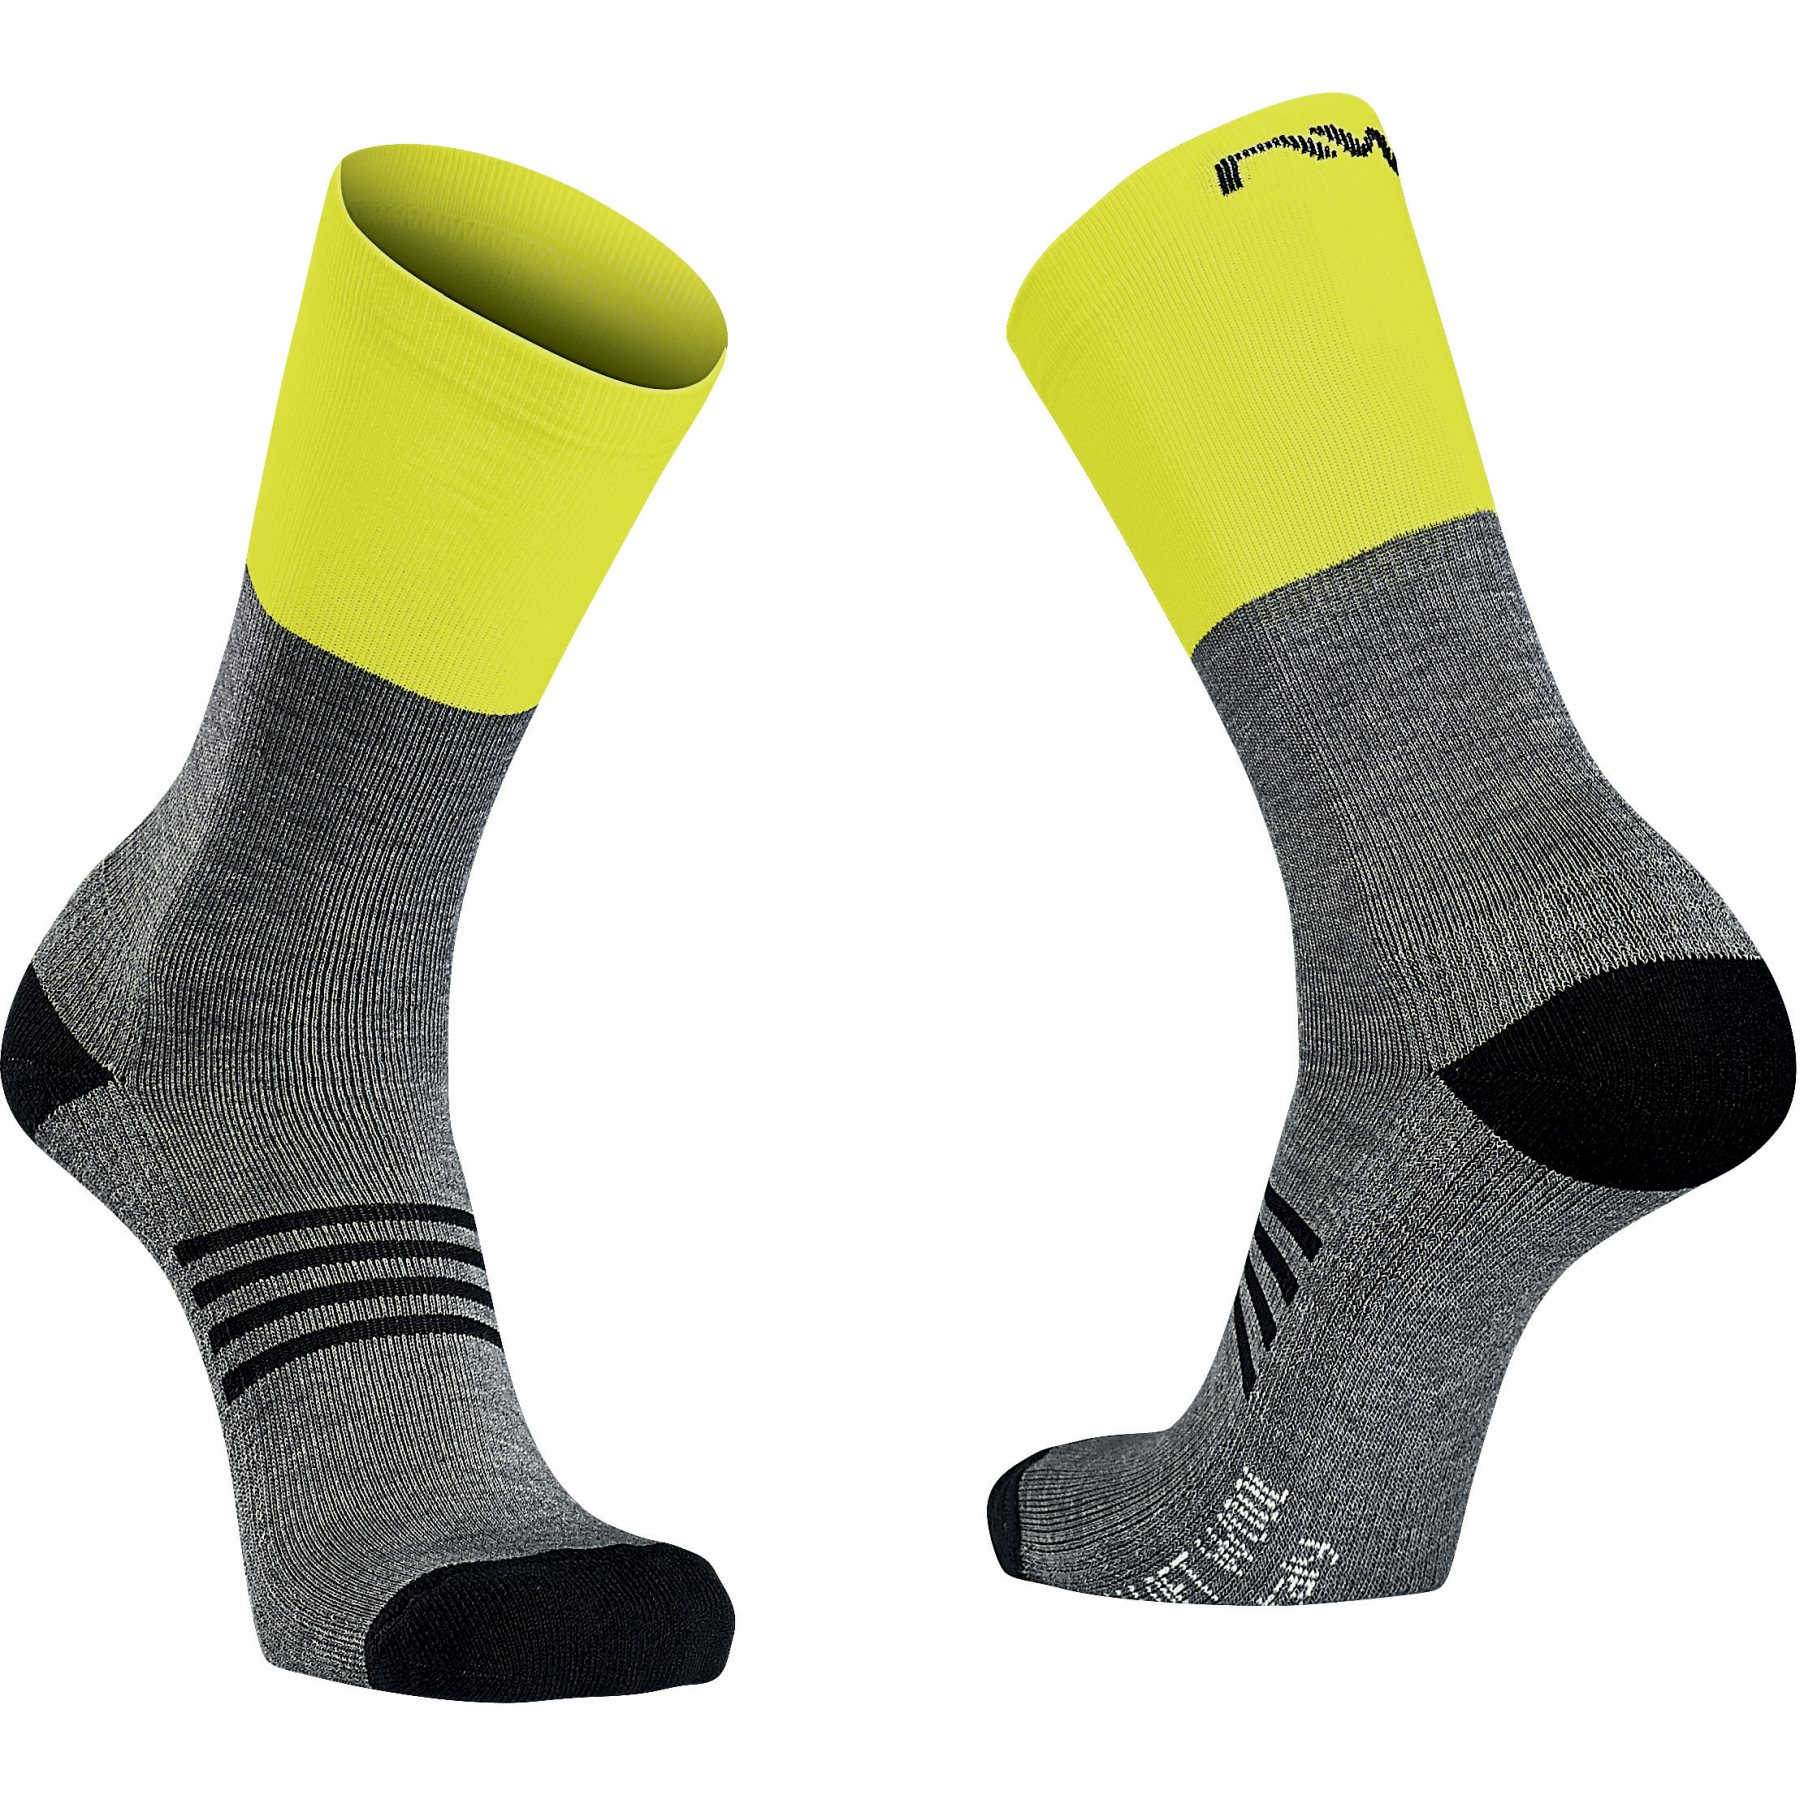 Picture of Northwave Extreme Pro High Socks - grey melange/yellow fluo 97